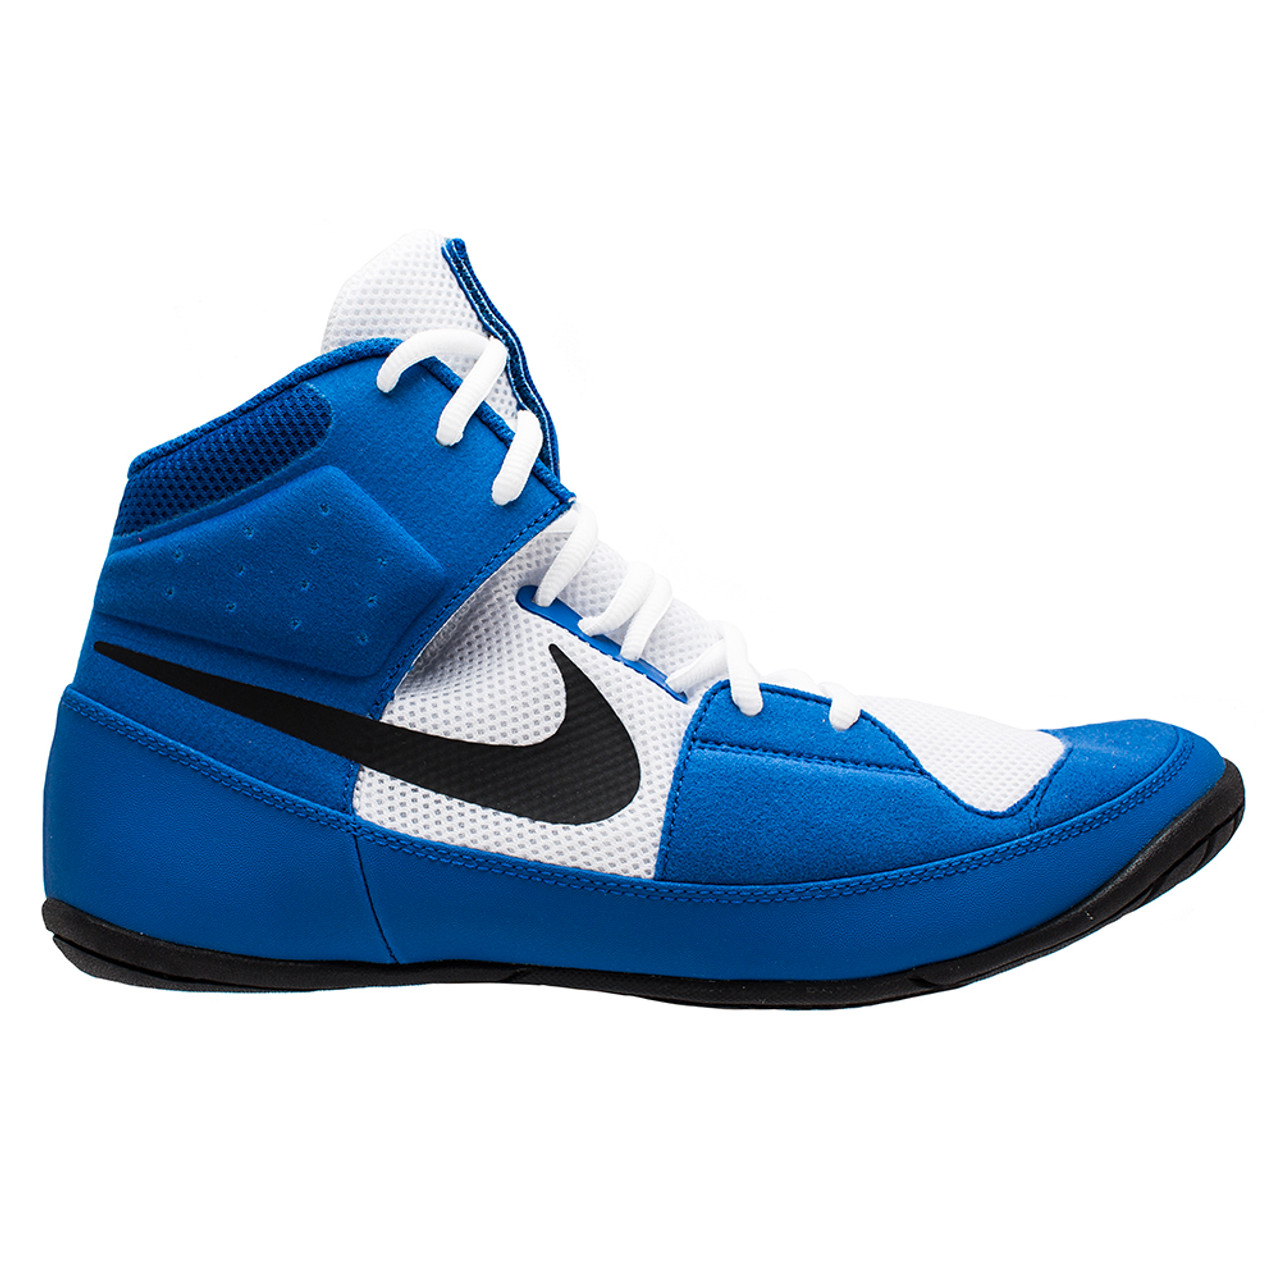 nike fury wrestling shoes review